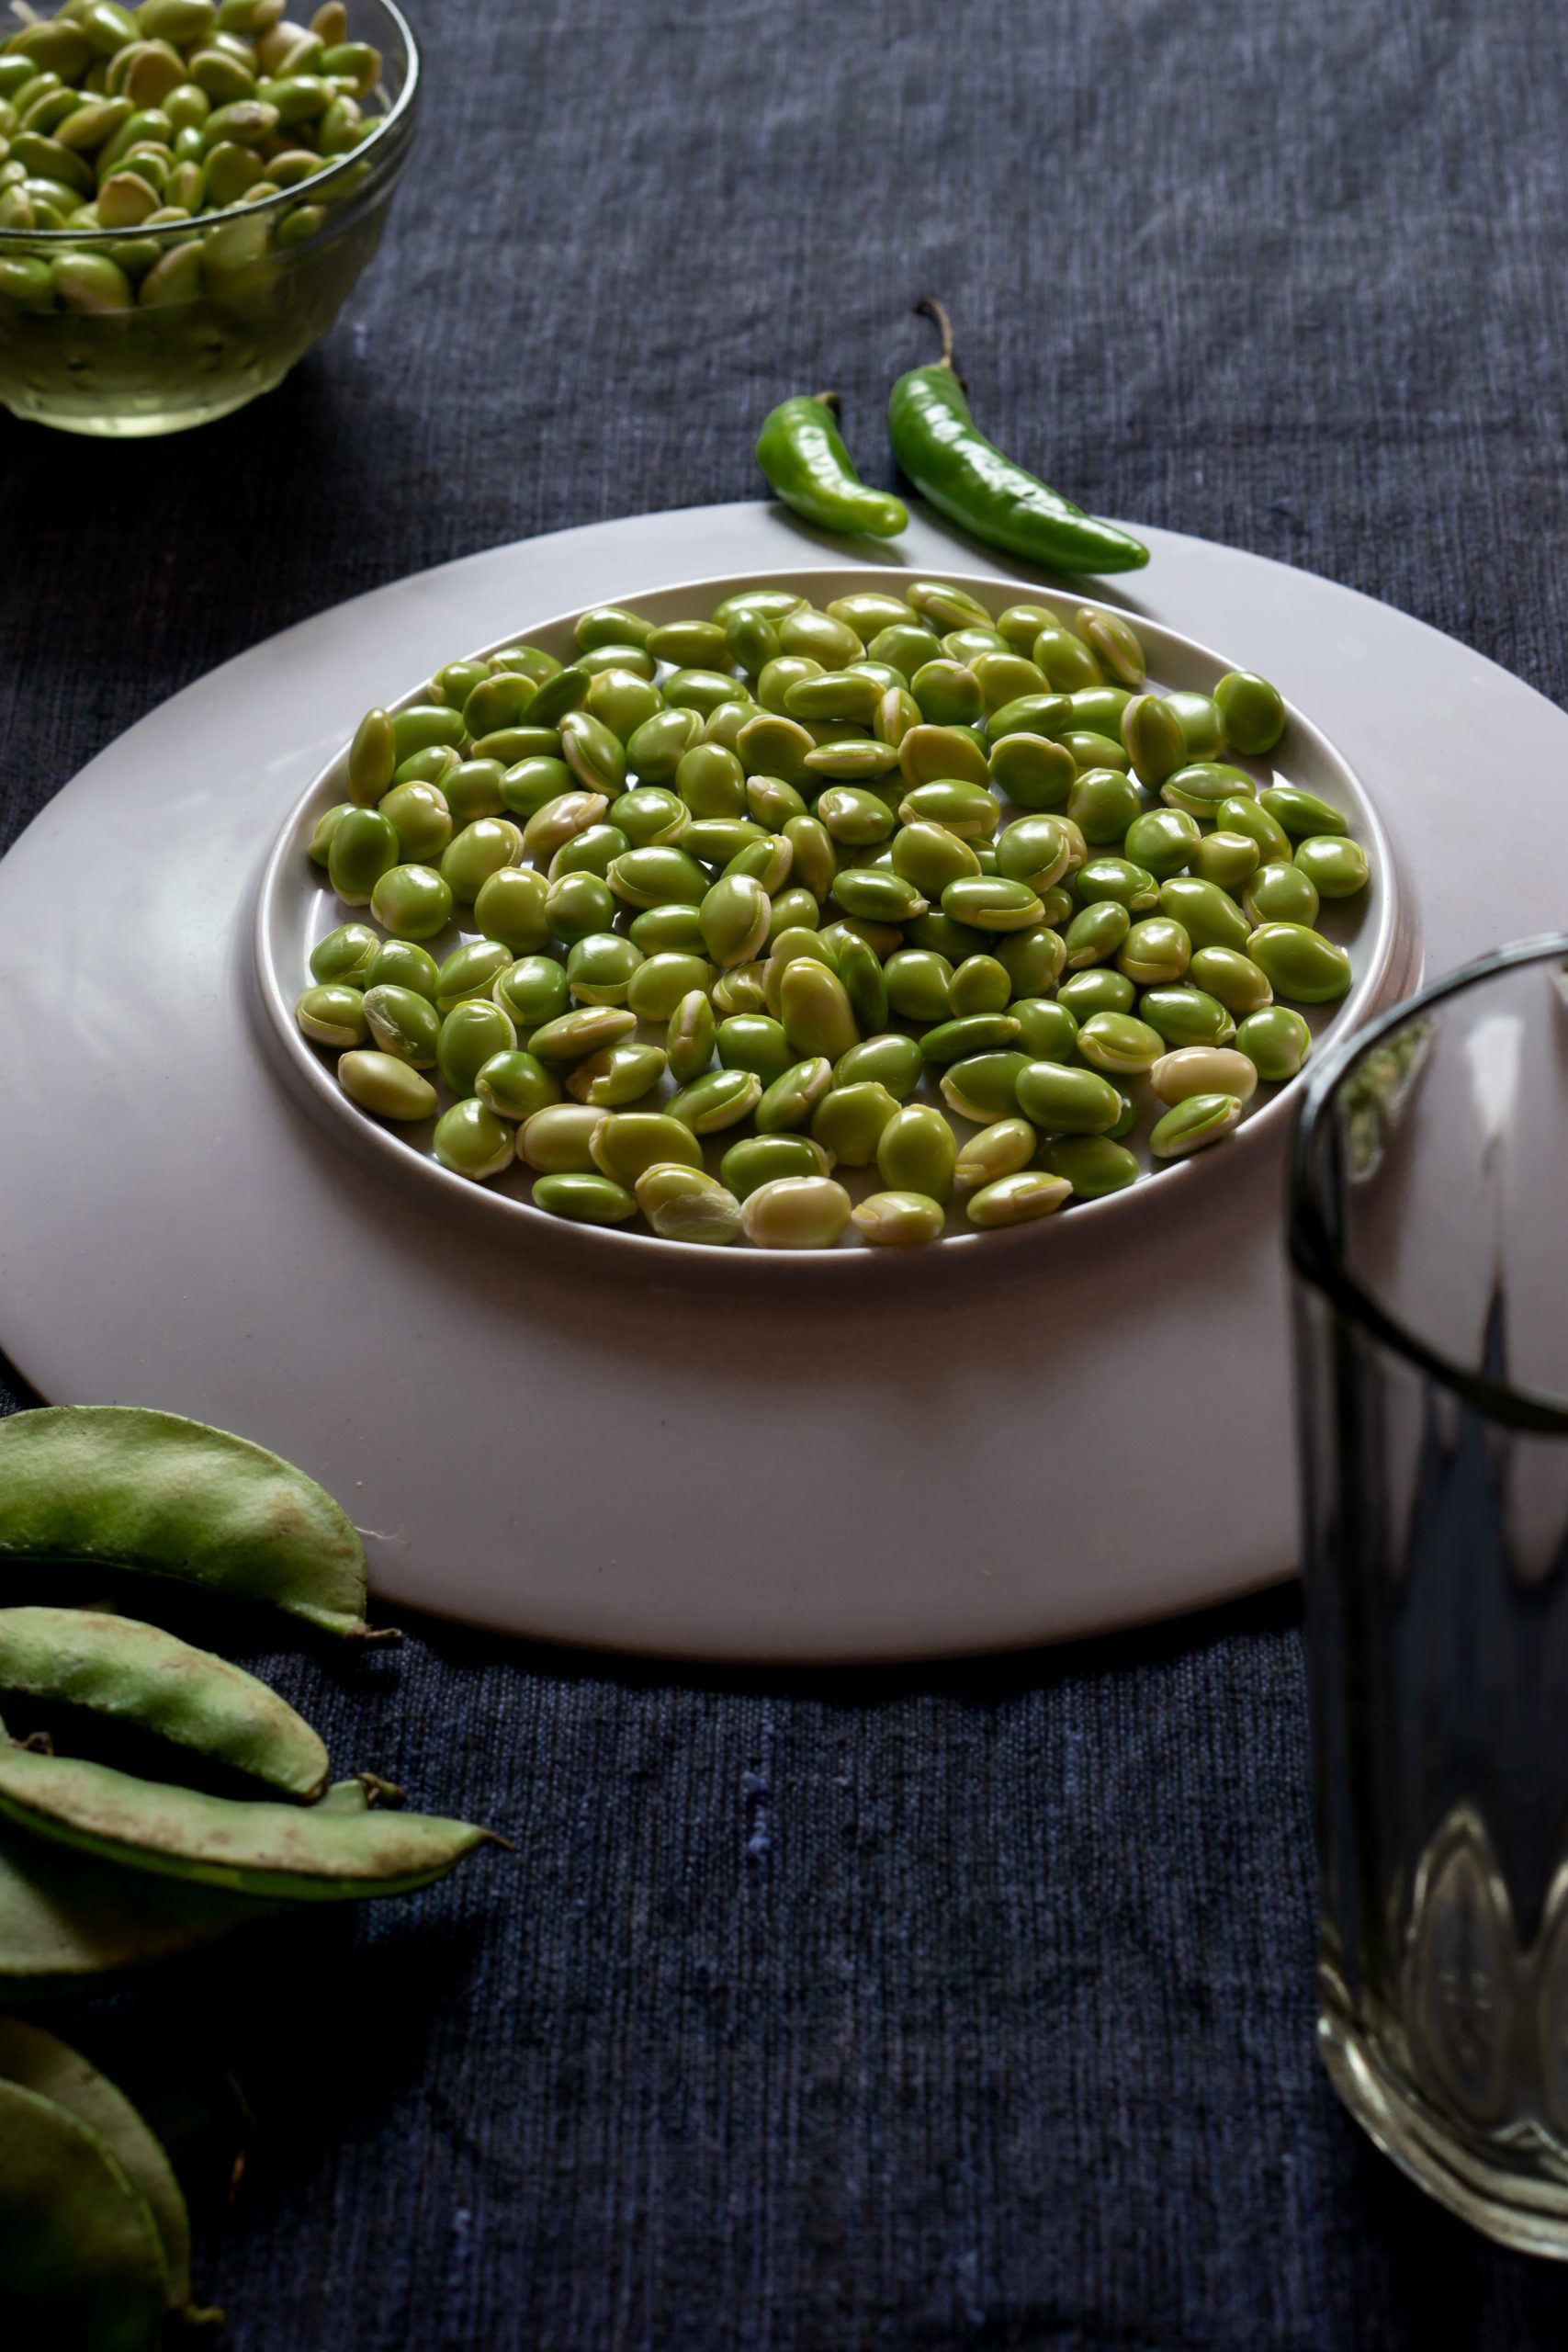 Lima beans in a plate